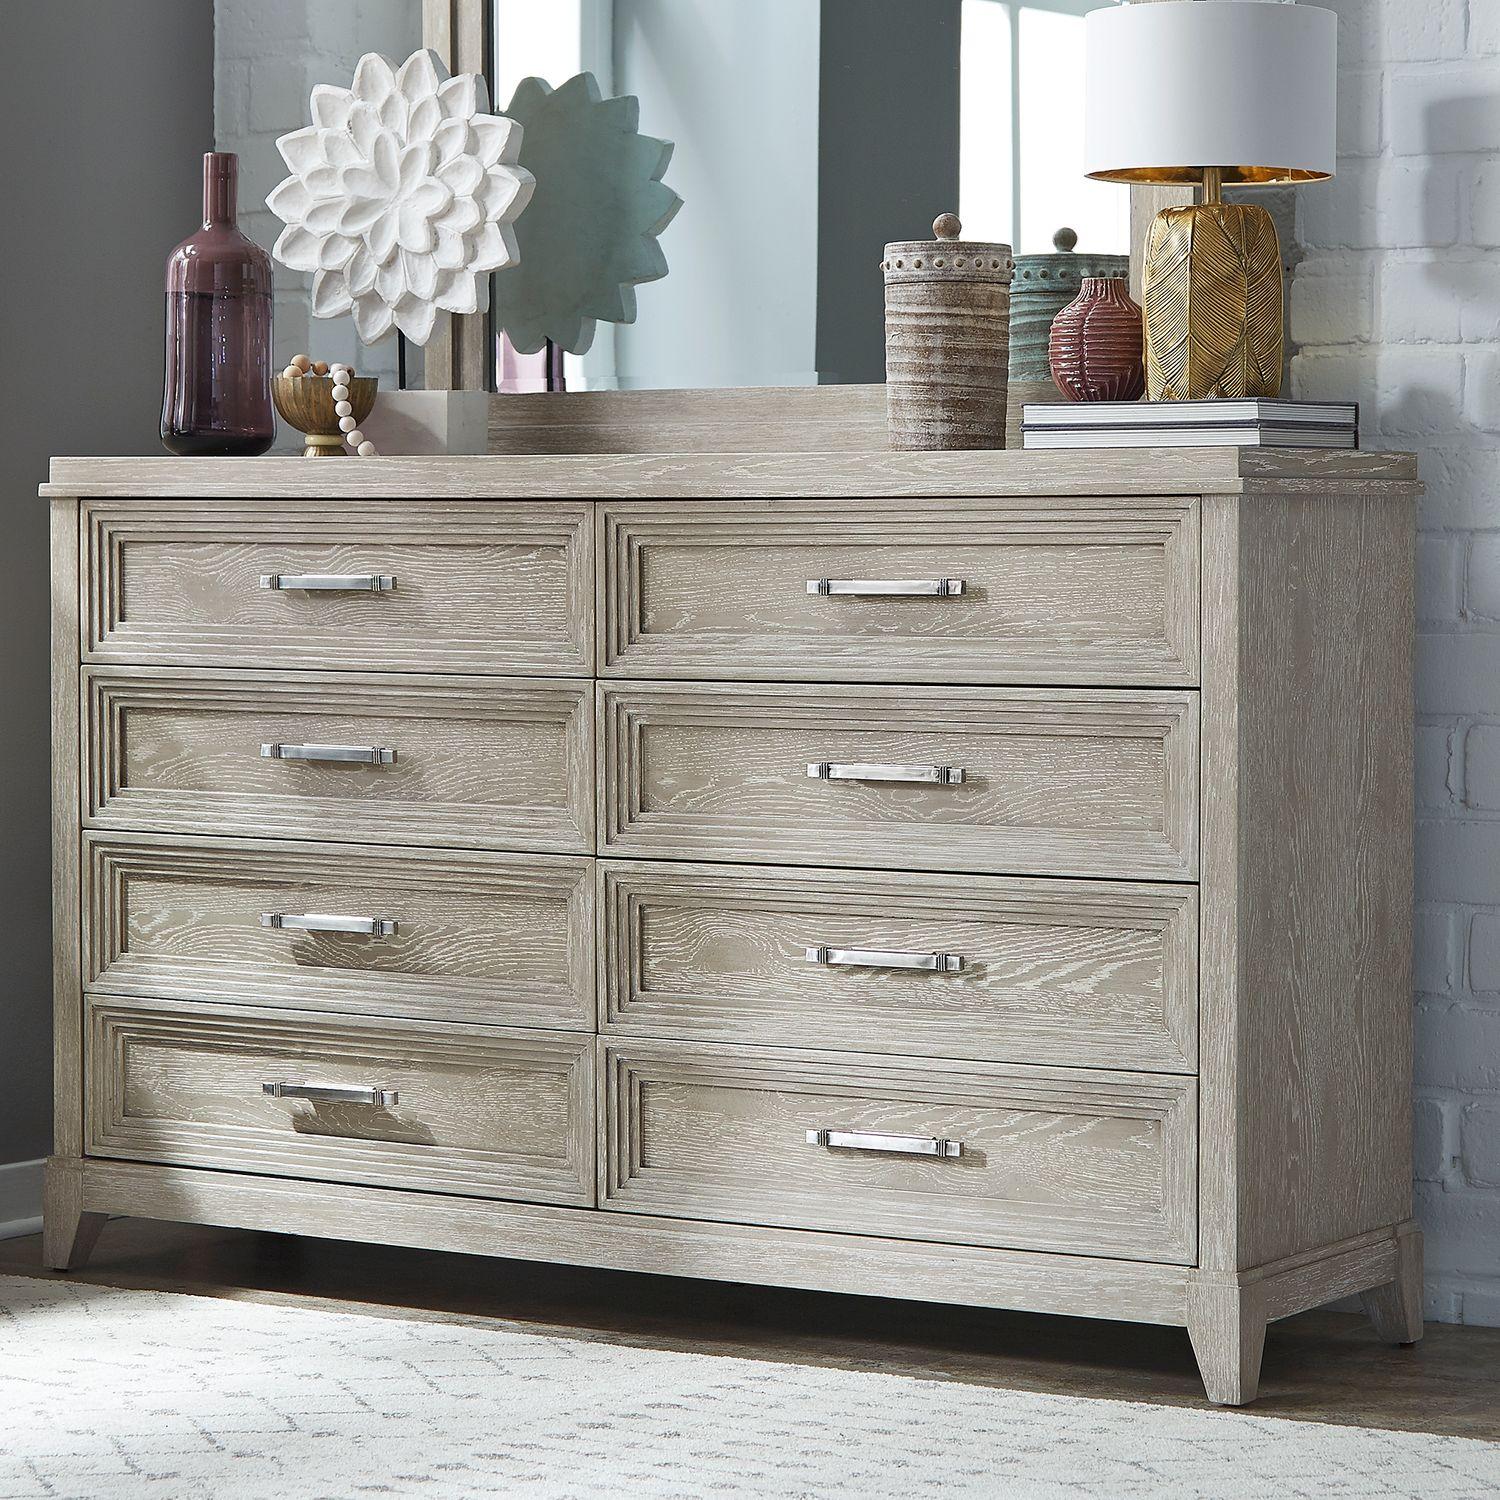 Transitional Double Dresser Belmar 902-BR31 902-BR31 in Taupe 